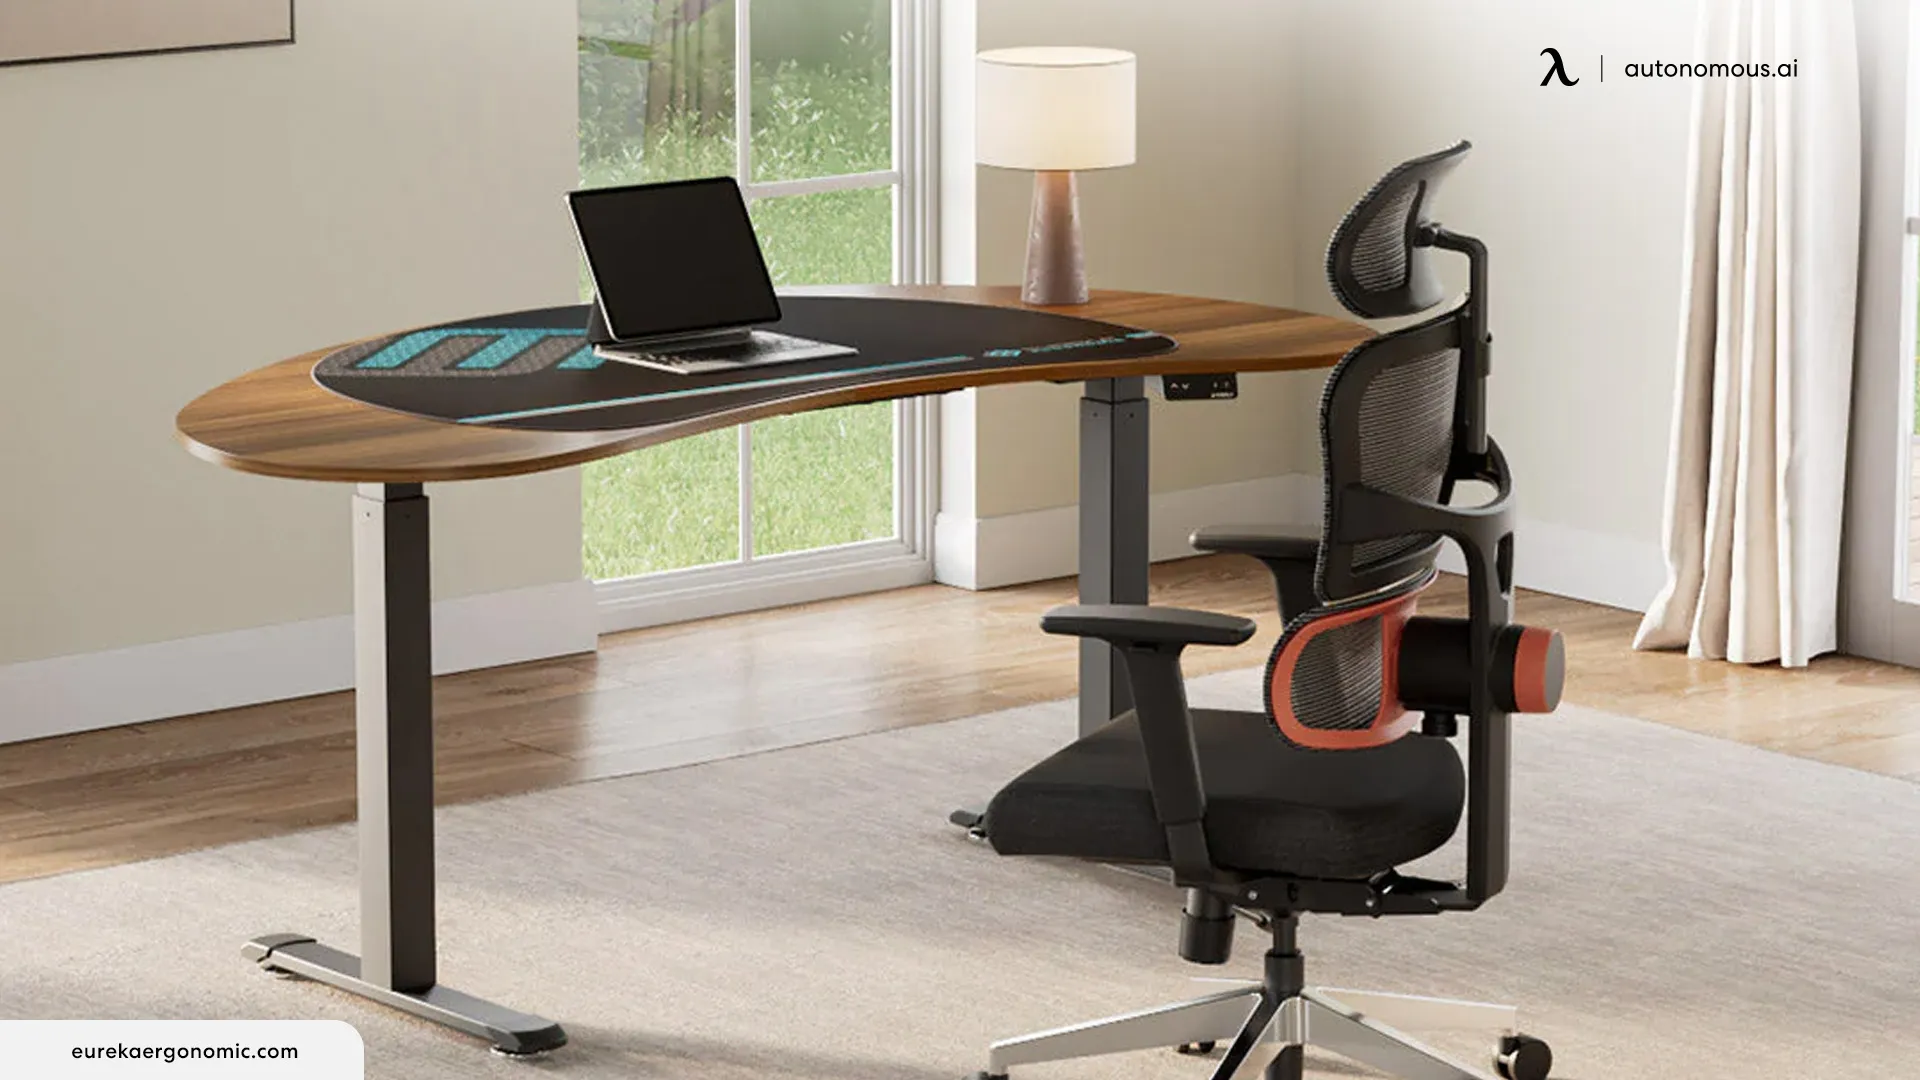 Use an Ergonomic Office Chair with Lumbar Support